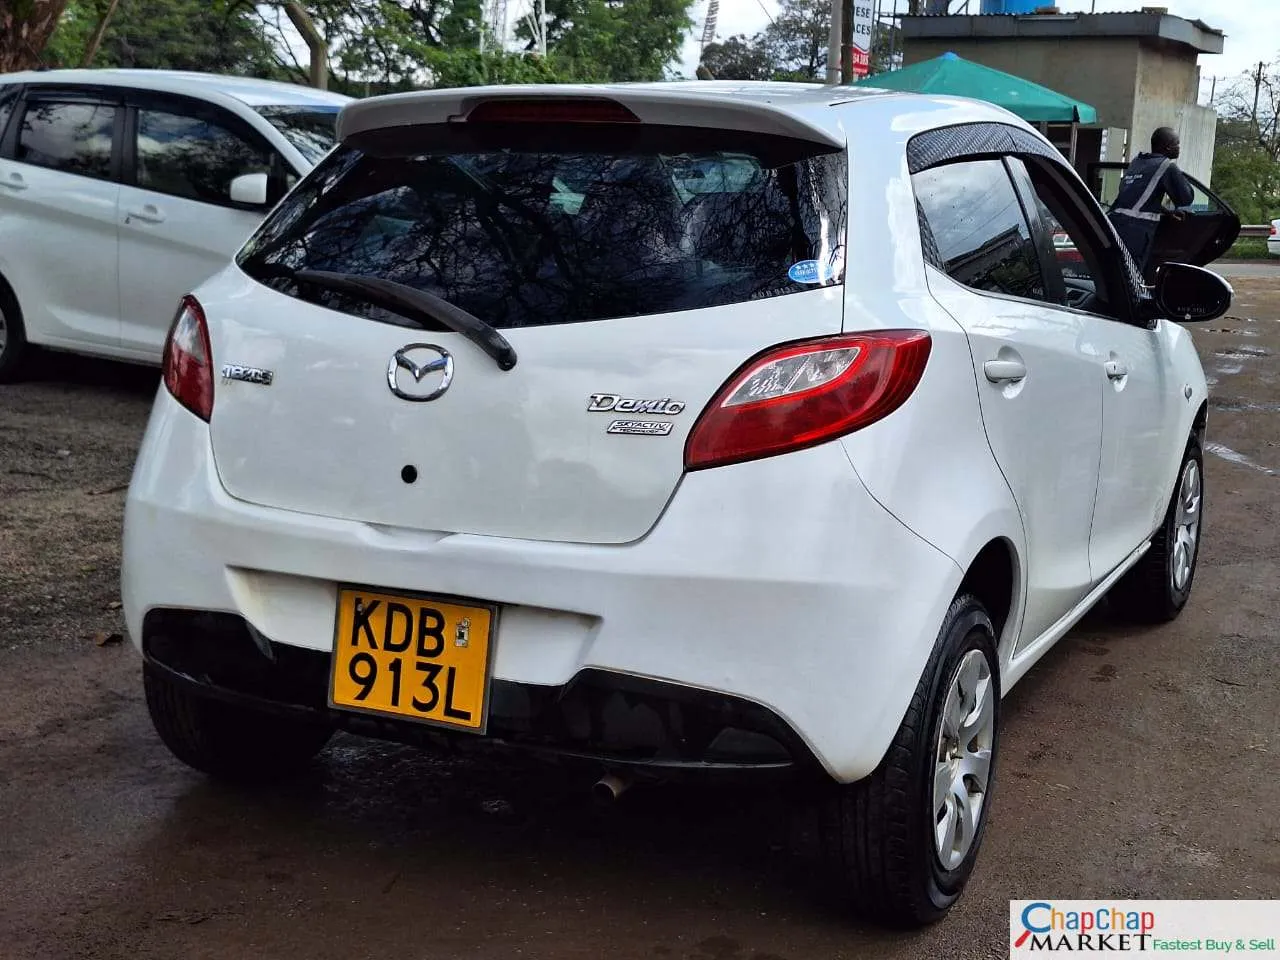 Mazda Demio kenya QUICK SALE You Pay 30% DEPOSIT demio for sale in kenya hire purchase installments TRADE IN OK EXCLUSIVE 🔥